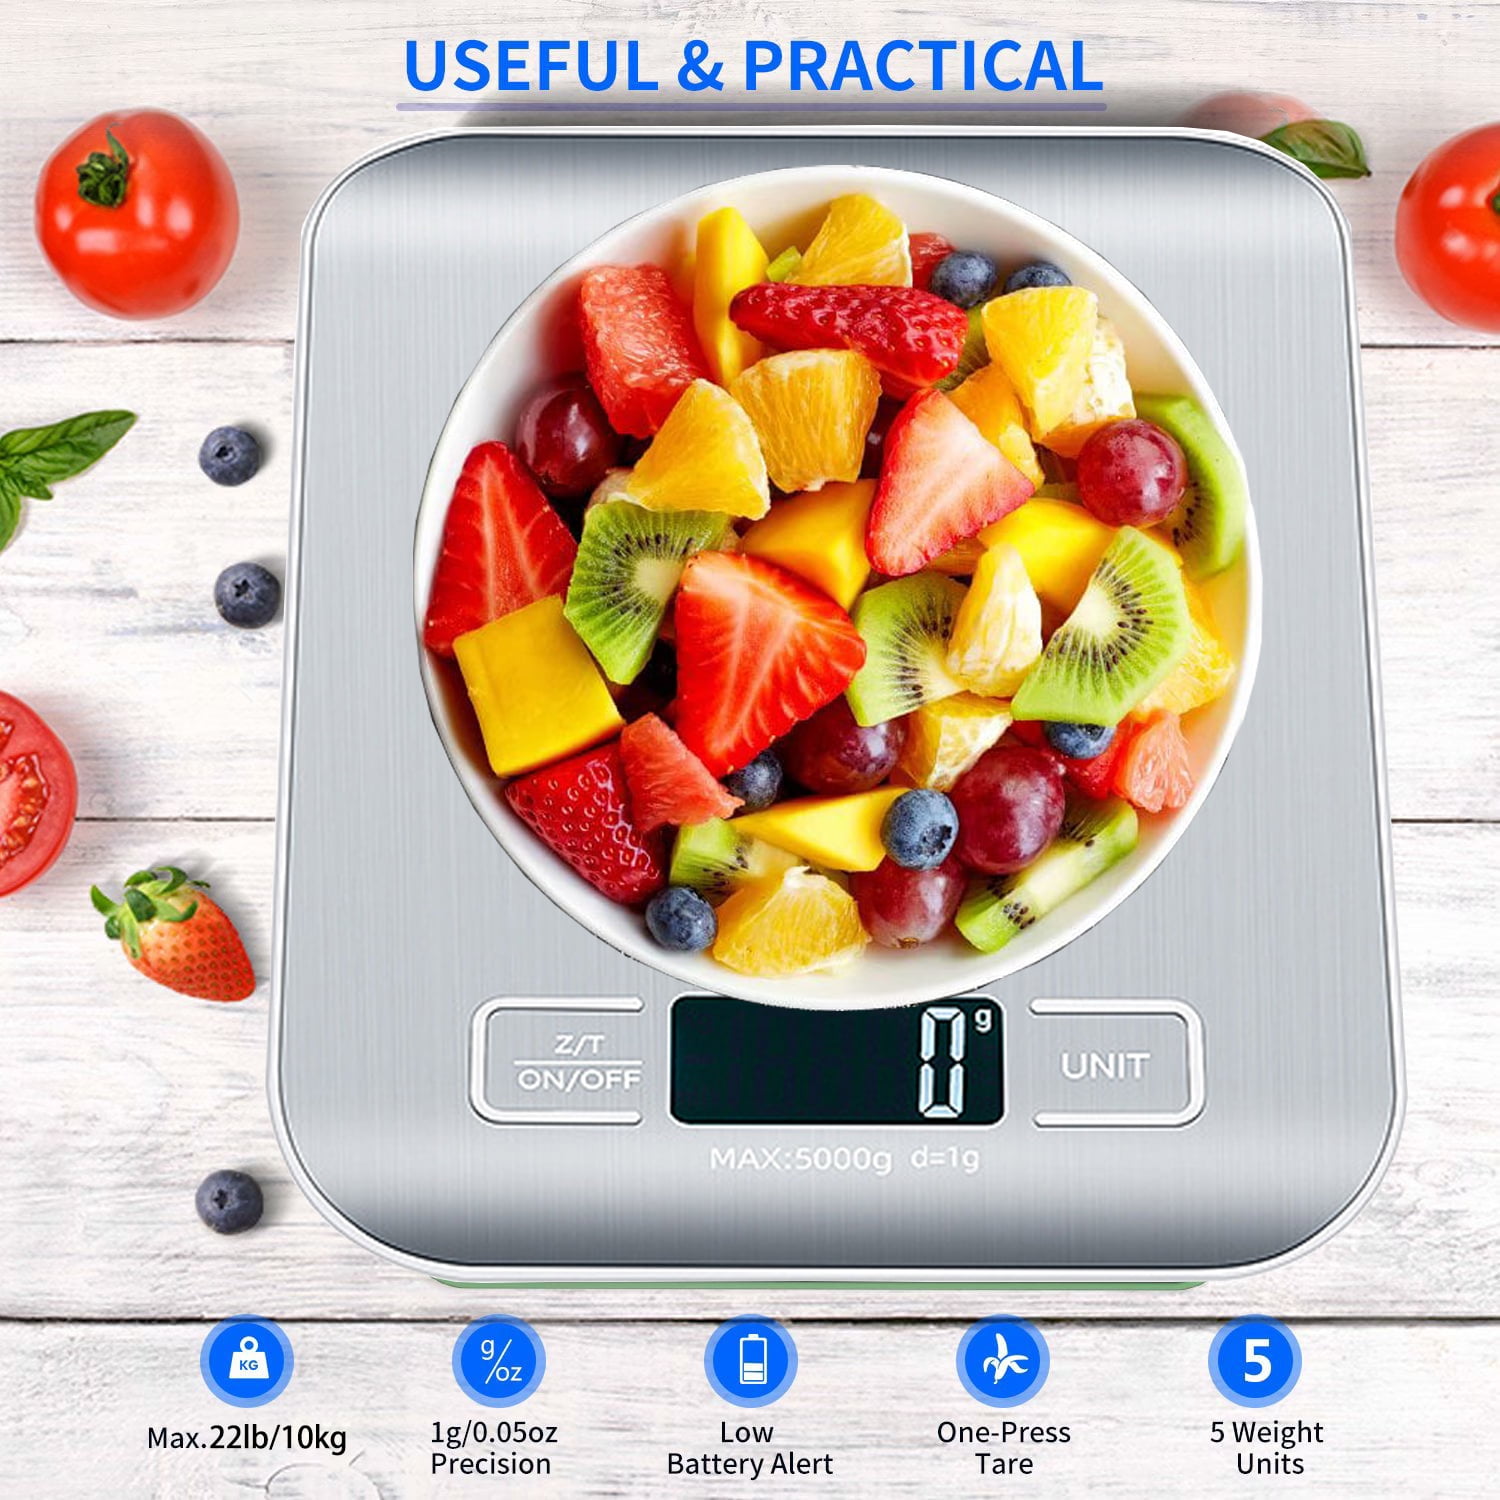 Upgraded Large Size Food Scale for Food Ounces and Grams, YONCON Kitchen  Scales Digital Weight for Cooking, Baking, 10kg by 1g High Accurate Gram